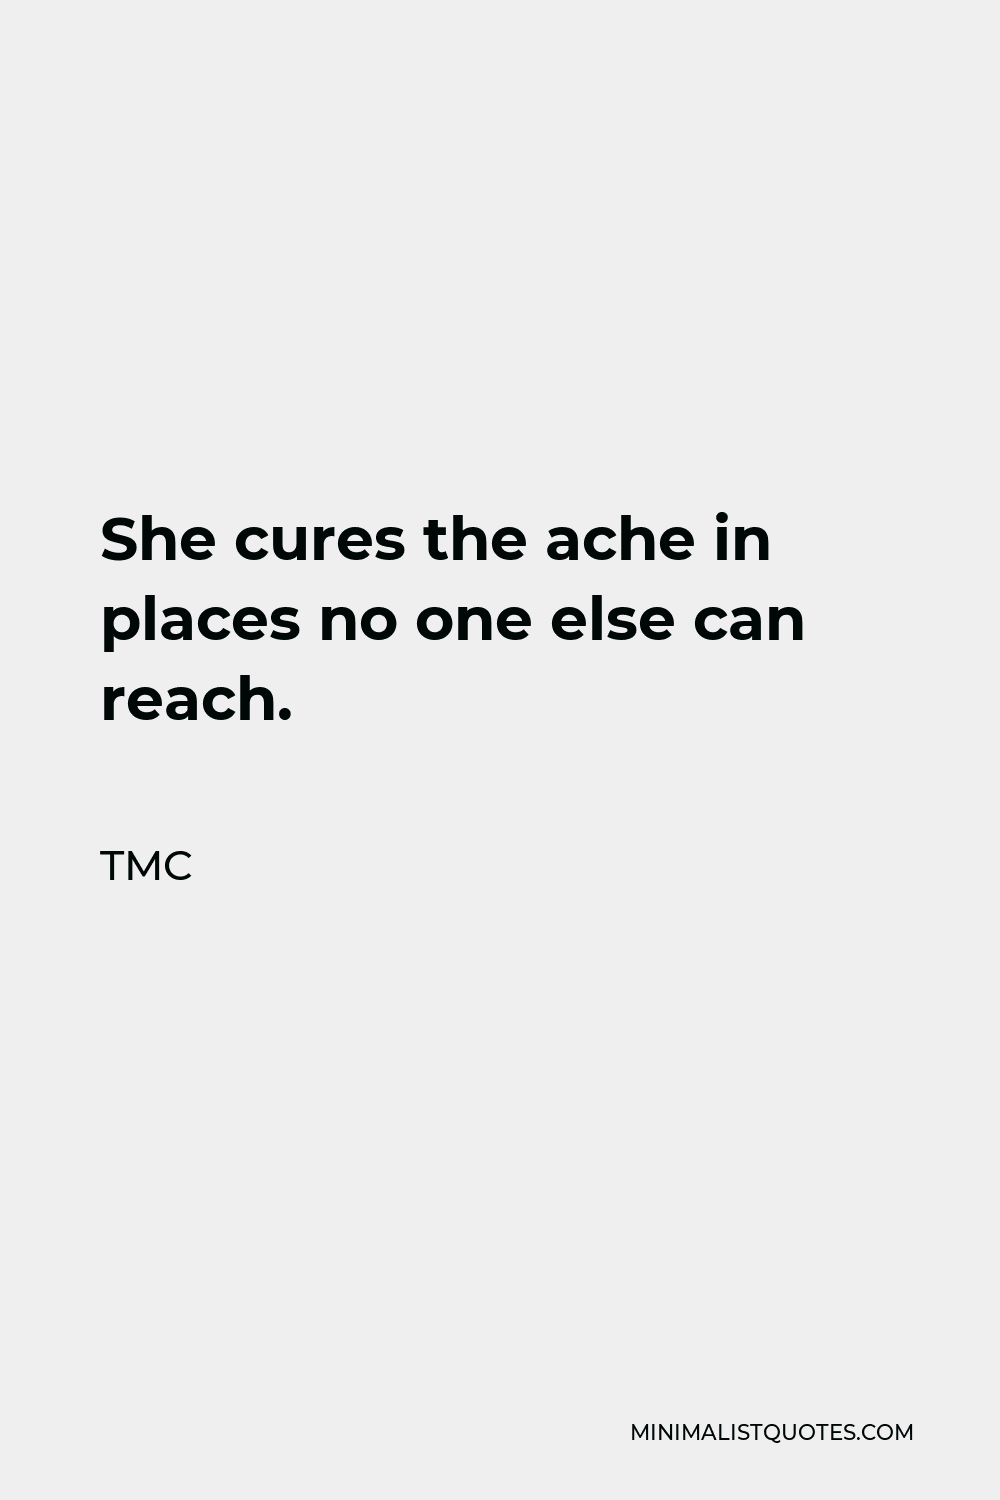 TMC Quote - She cures the ache in places no one else can reach.